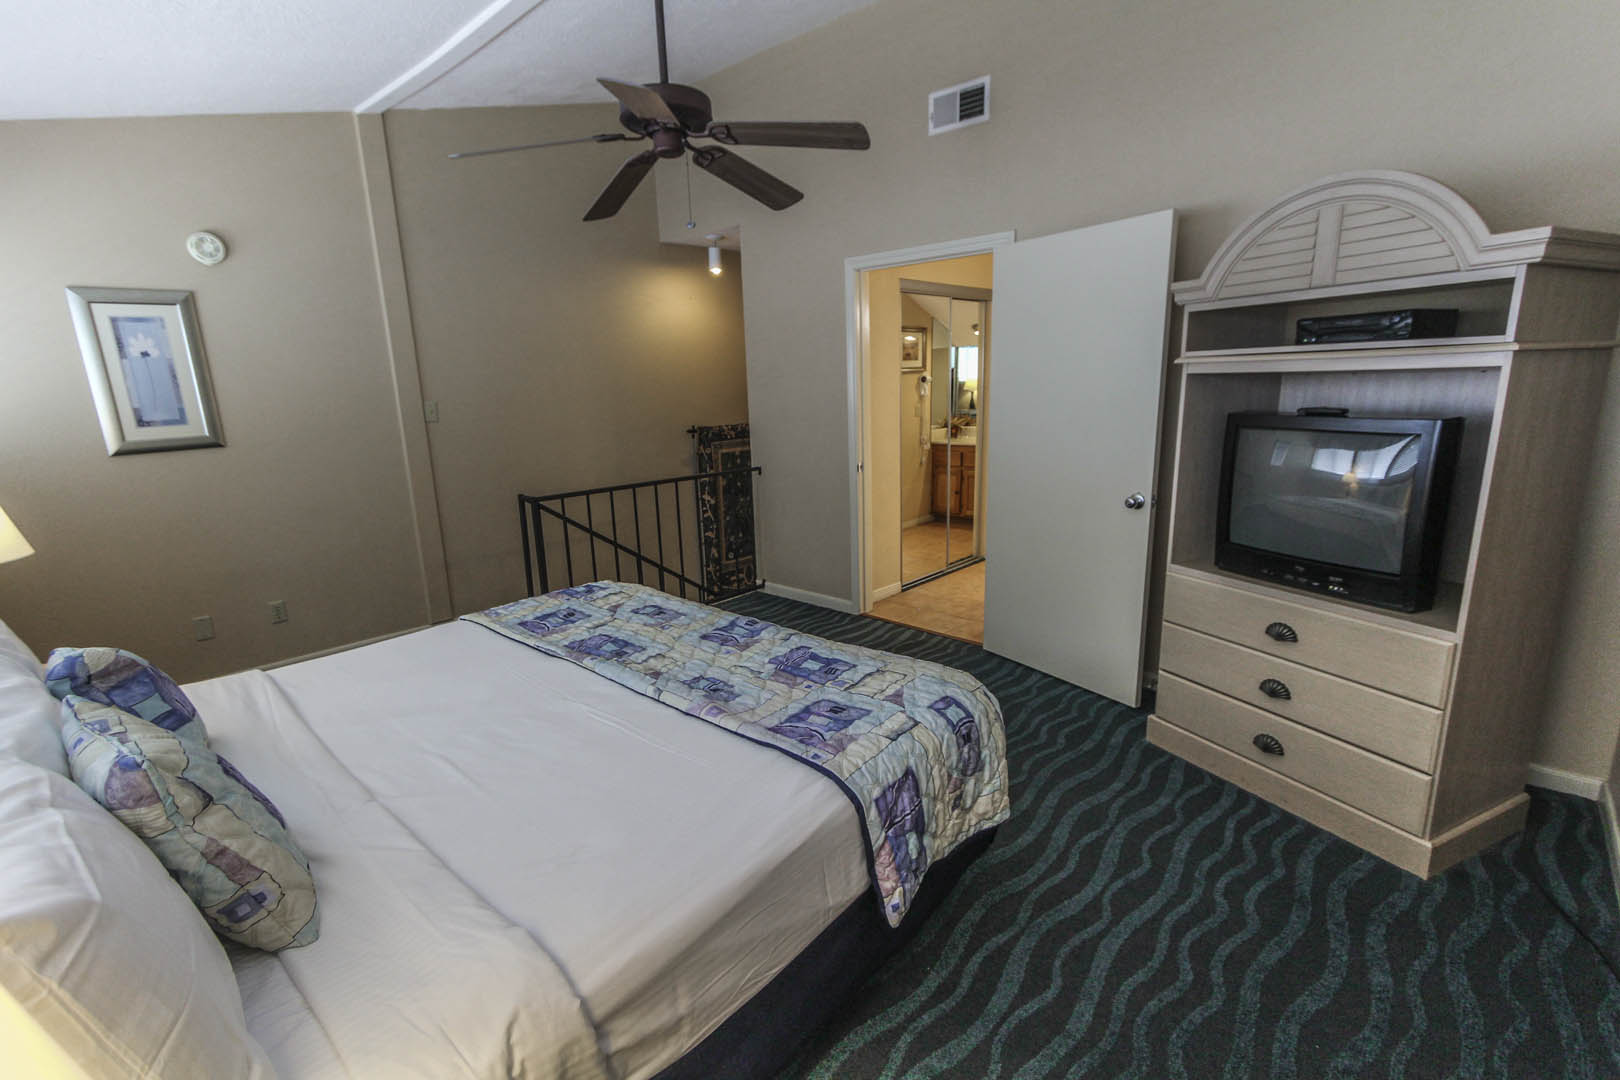 A comfy bedroom at VRI's The Landing at Seven Coves in Willis, Texas.